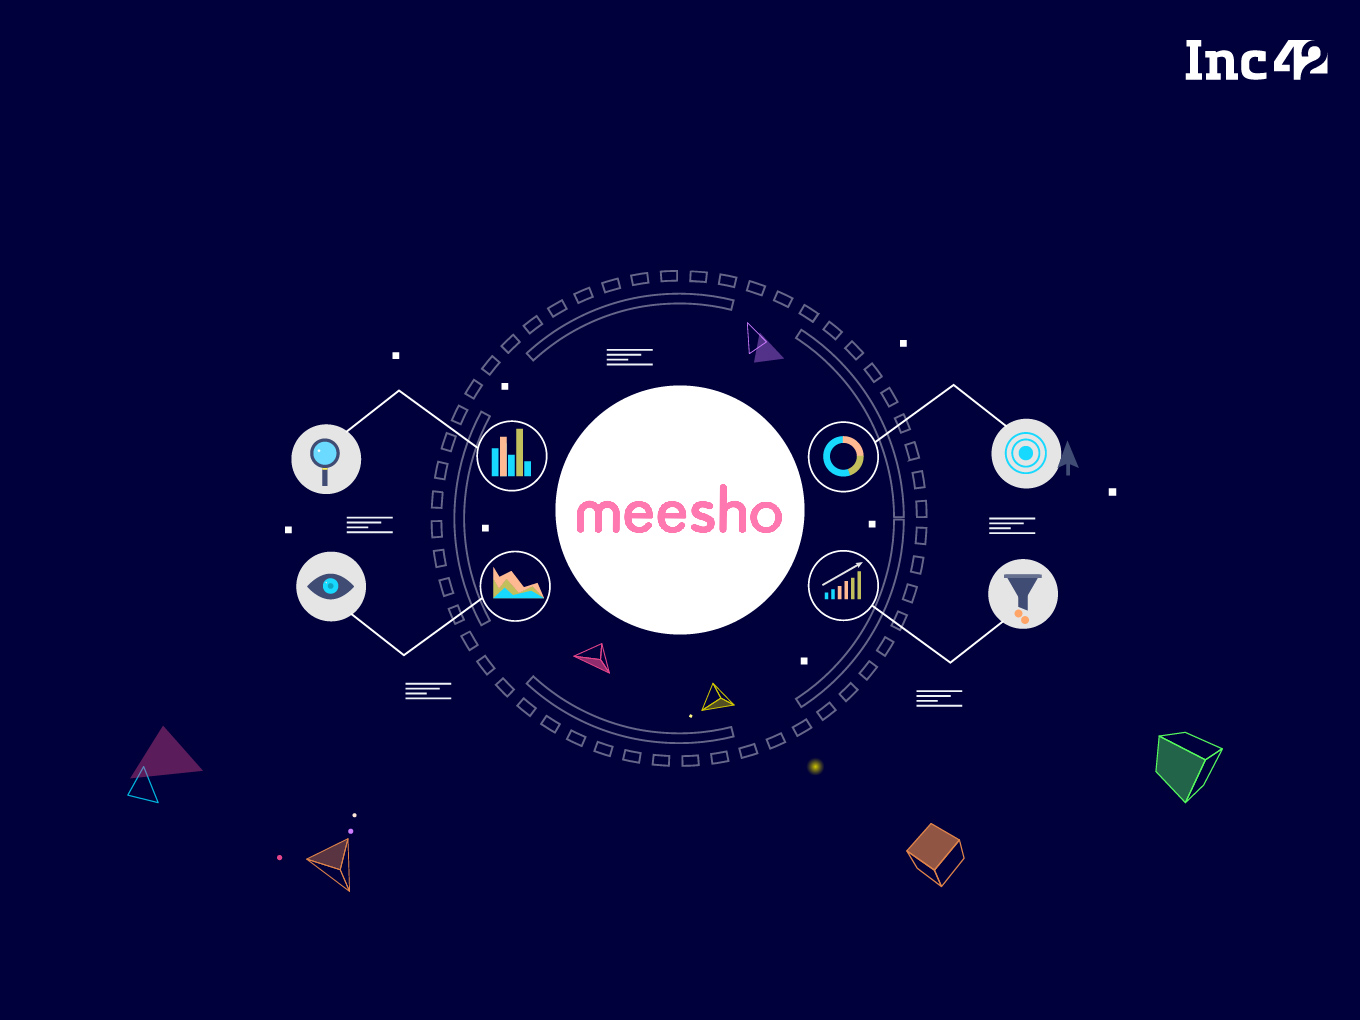 [What The Financials] Meesho’s 19X Higher Losses Expose Chinks In Social Commerce Model